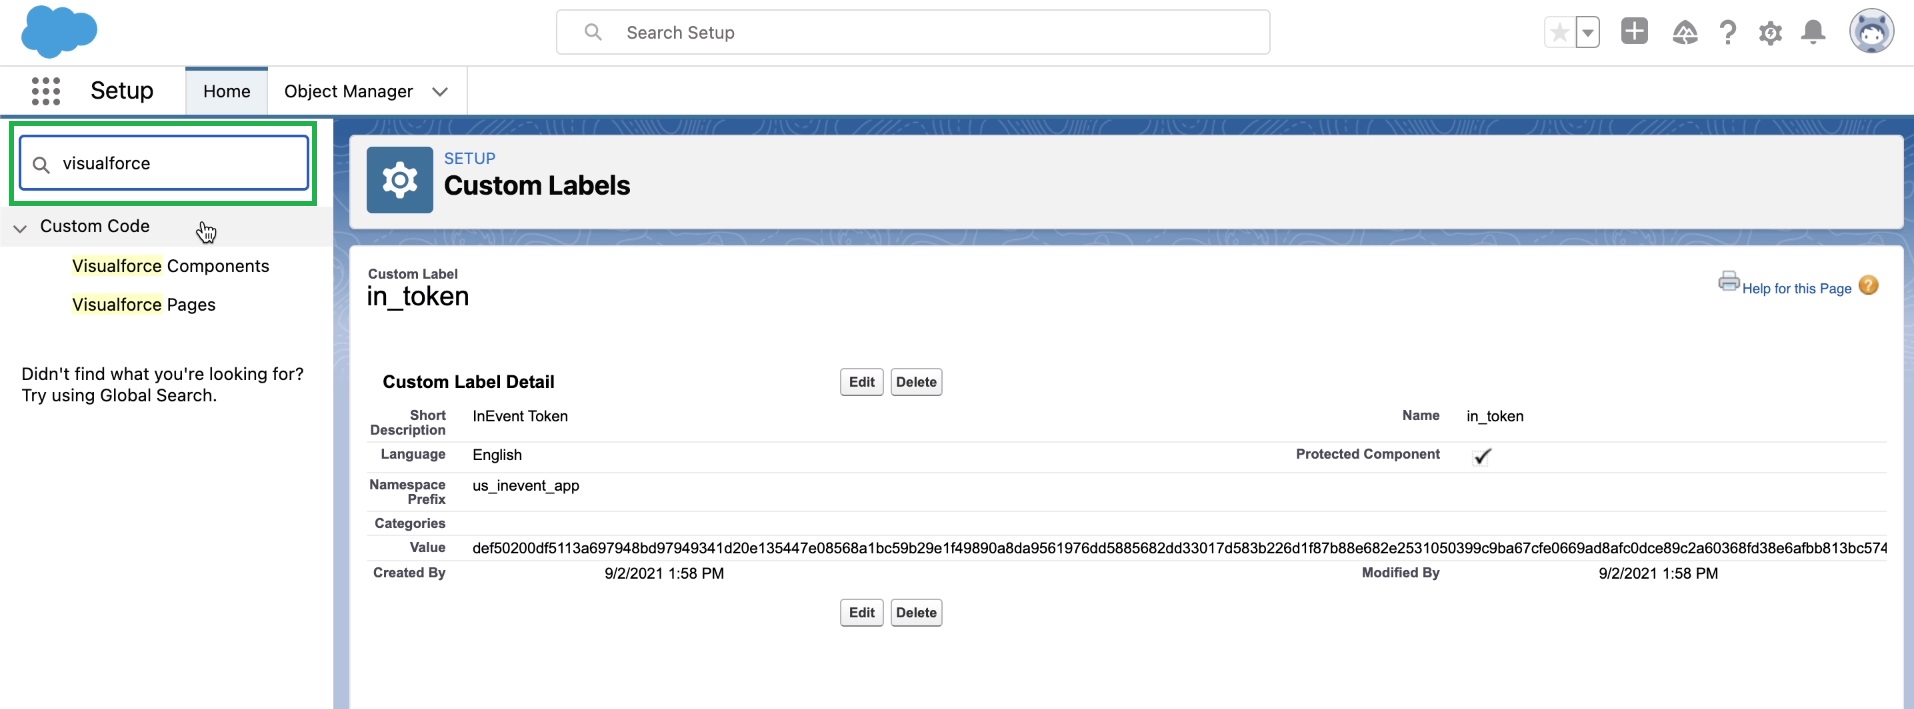 Visualforce on the search button